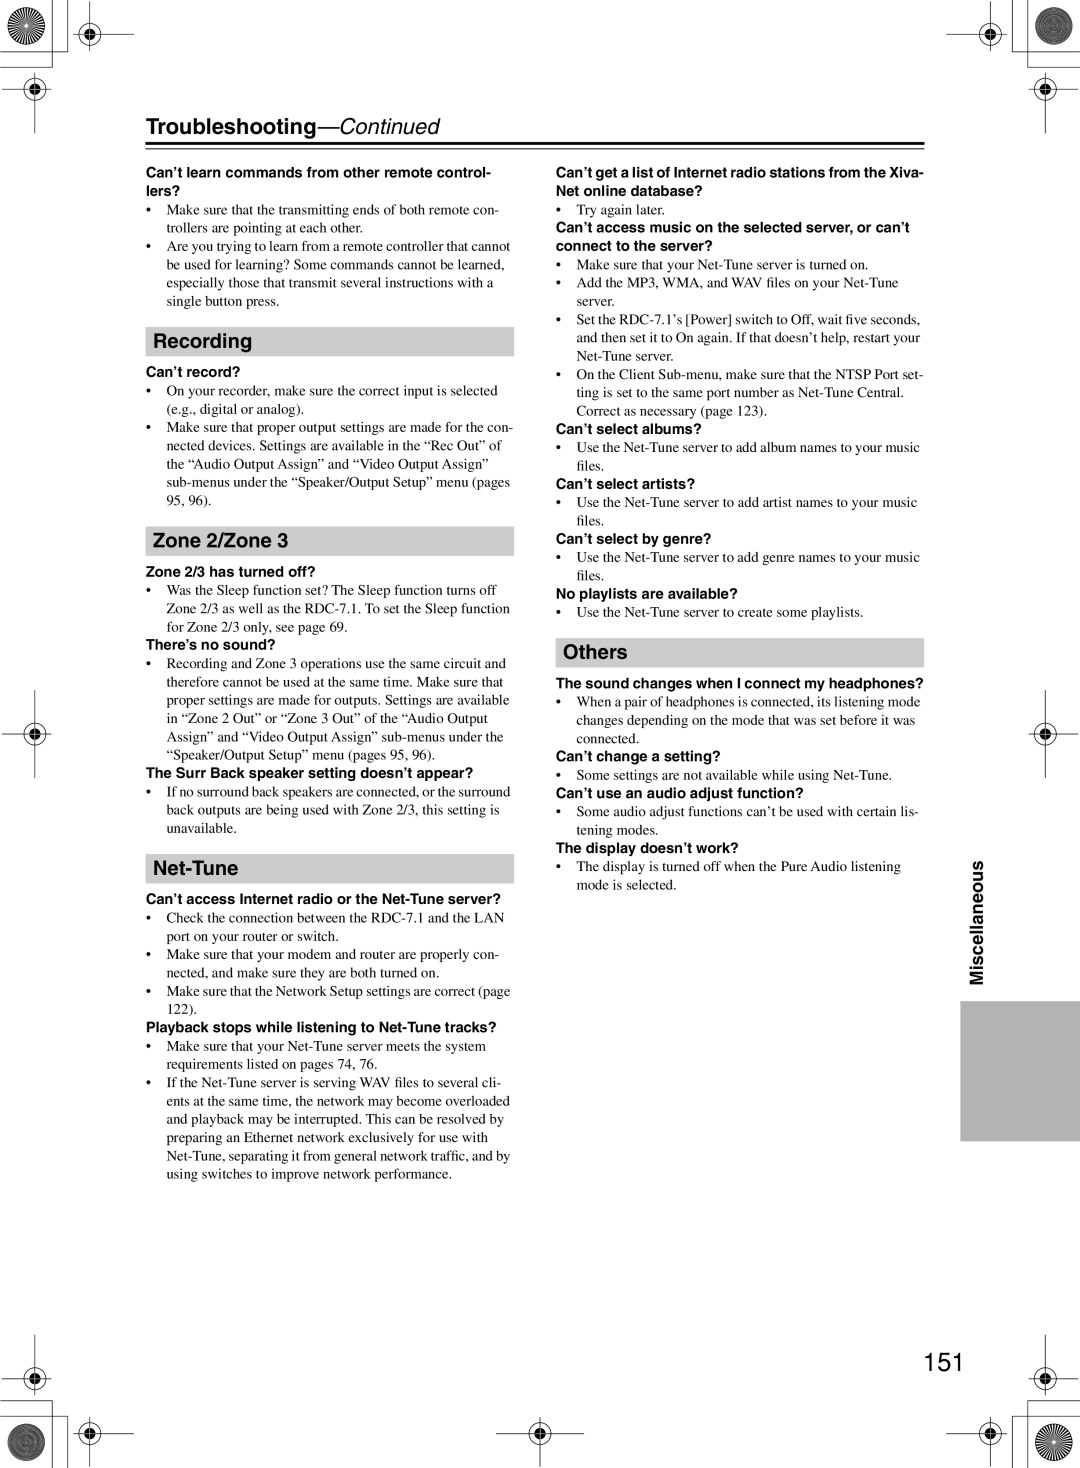 Integra RDC-7.1 instruction manual Recording, Zone 2/Zone, Net-Tune, Others, Troubleshooting—Continued, Miscellaneous 